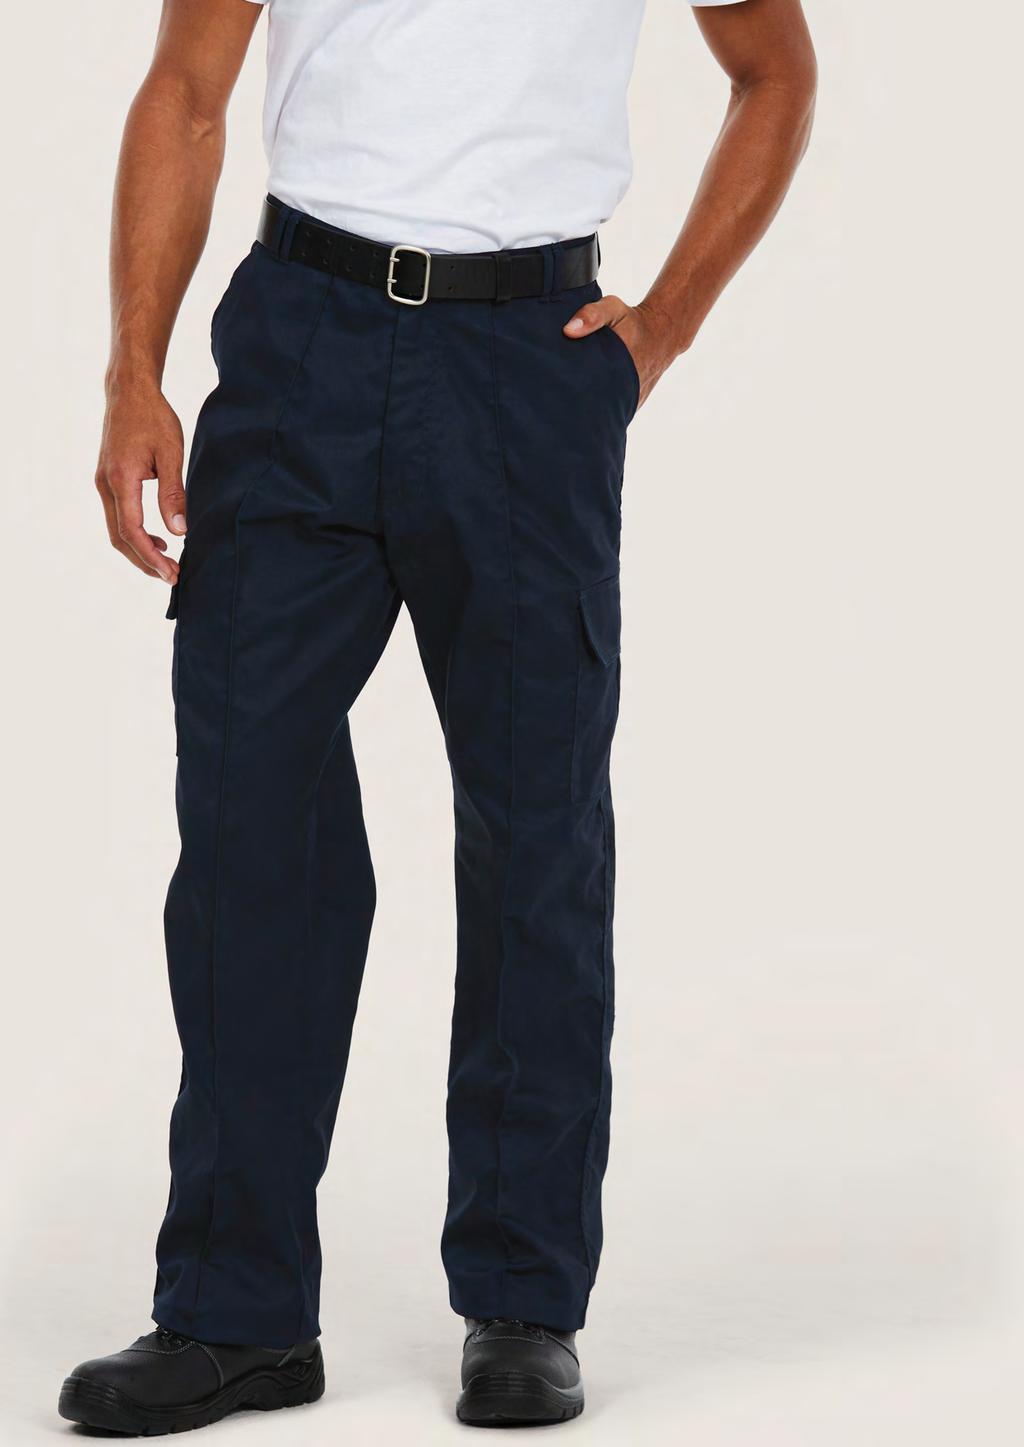 TROUSERS UC902 UNISEX CARGO TROUSER 245 60 25/5 65% Polyester 35% Cotton Fabric: 245 /7 oz Flat front with sewn-in front crease 2 side & 2 rear pockets with velcro flaps 2 thigh pockets with velcro